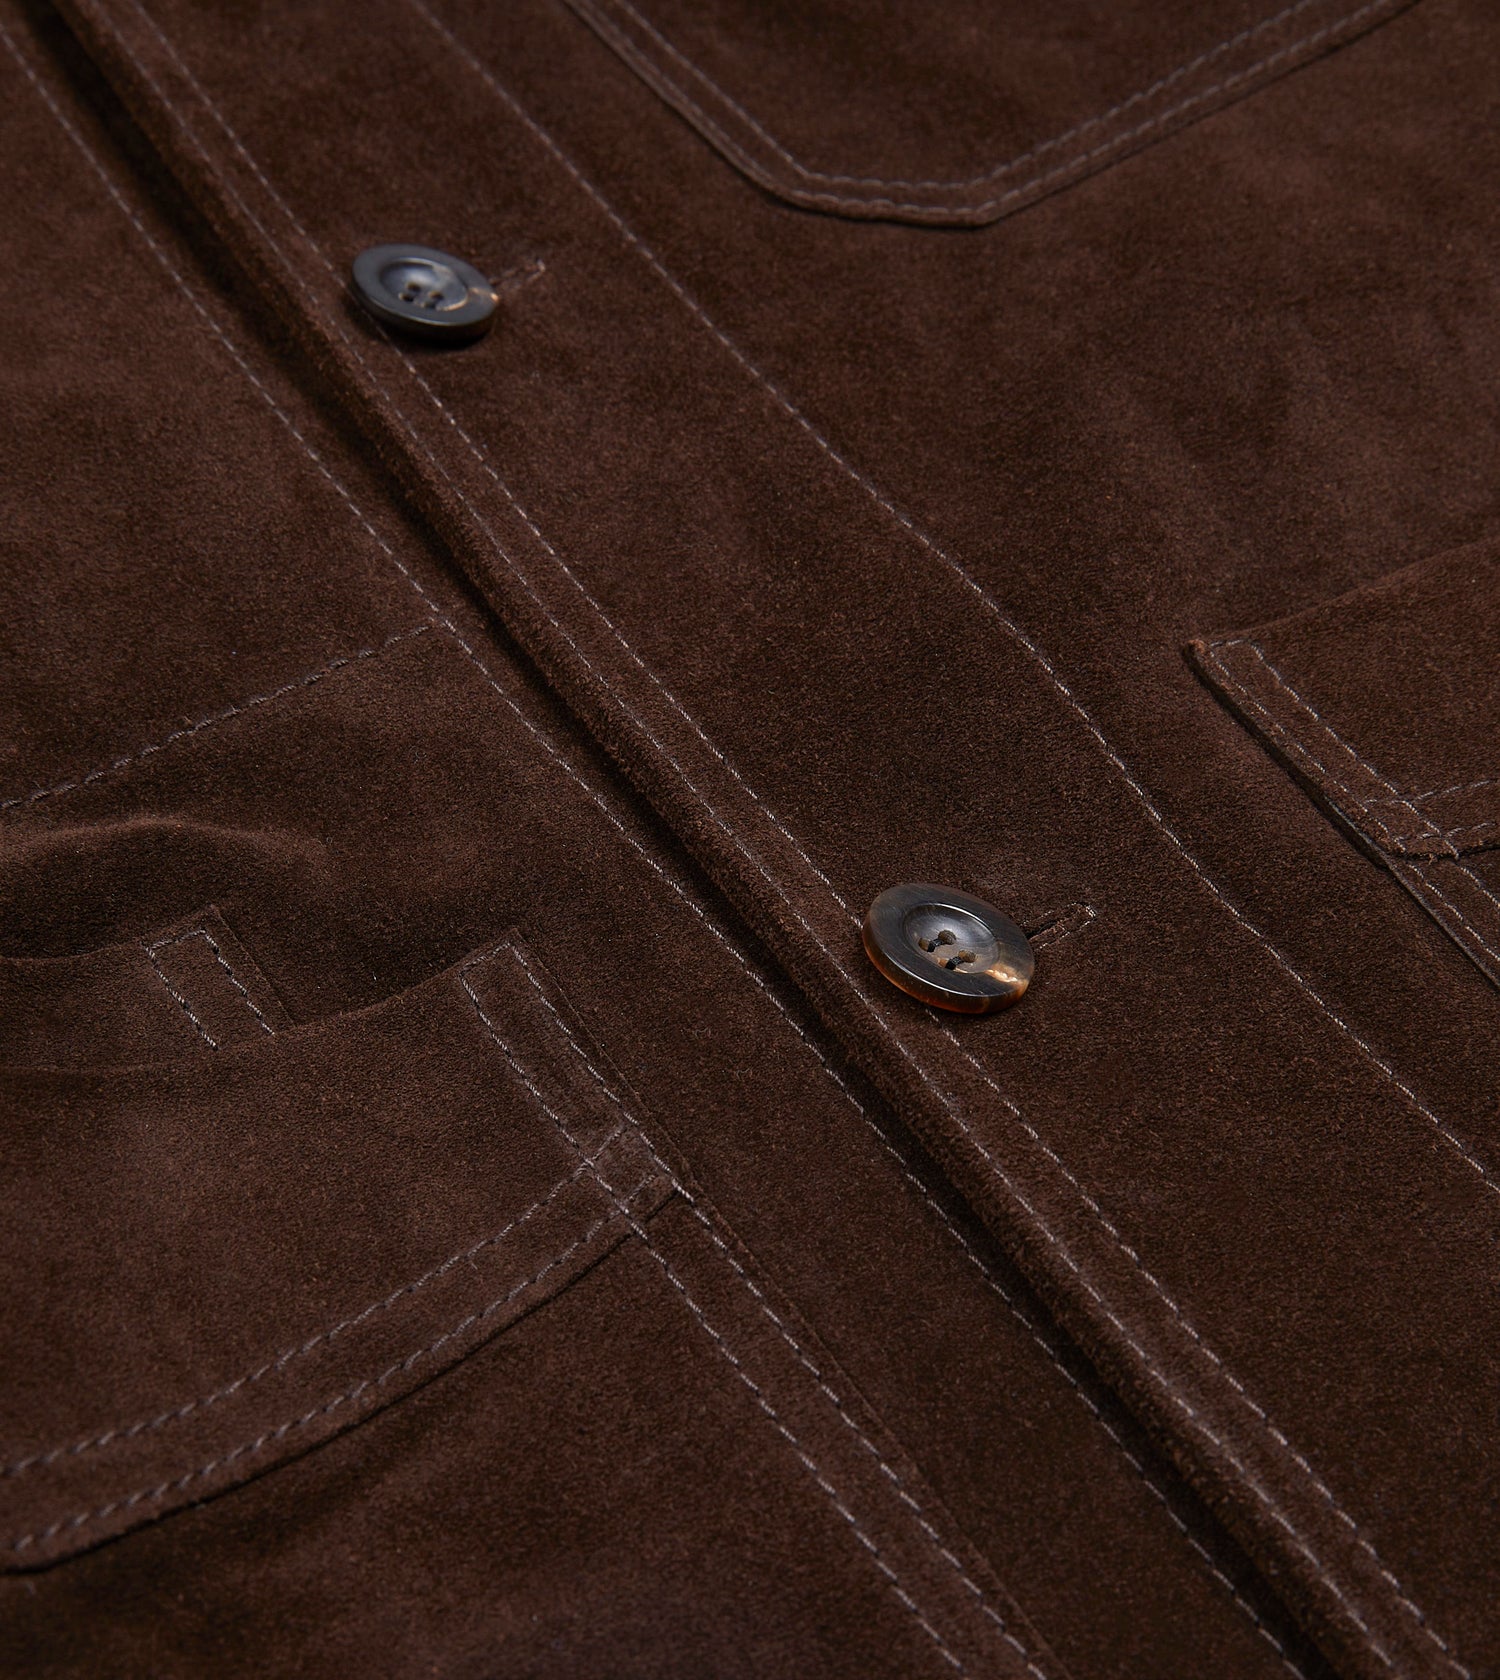 Chocolate Brown Heavyweight Suede Five-Pocket Chore Jacket